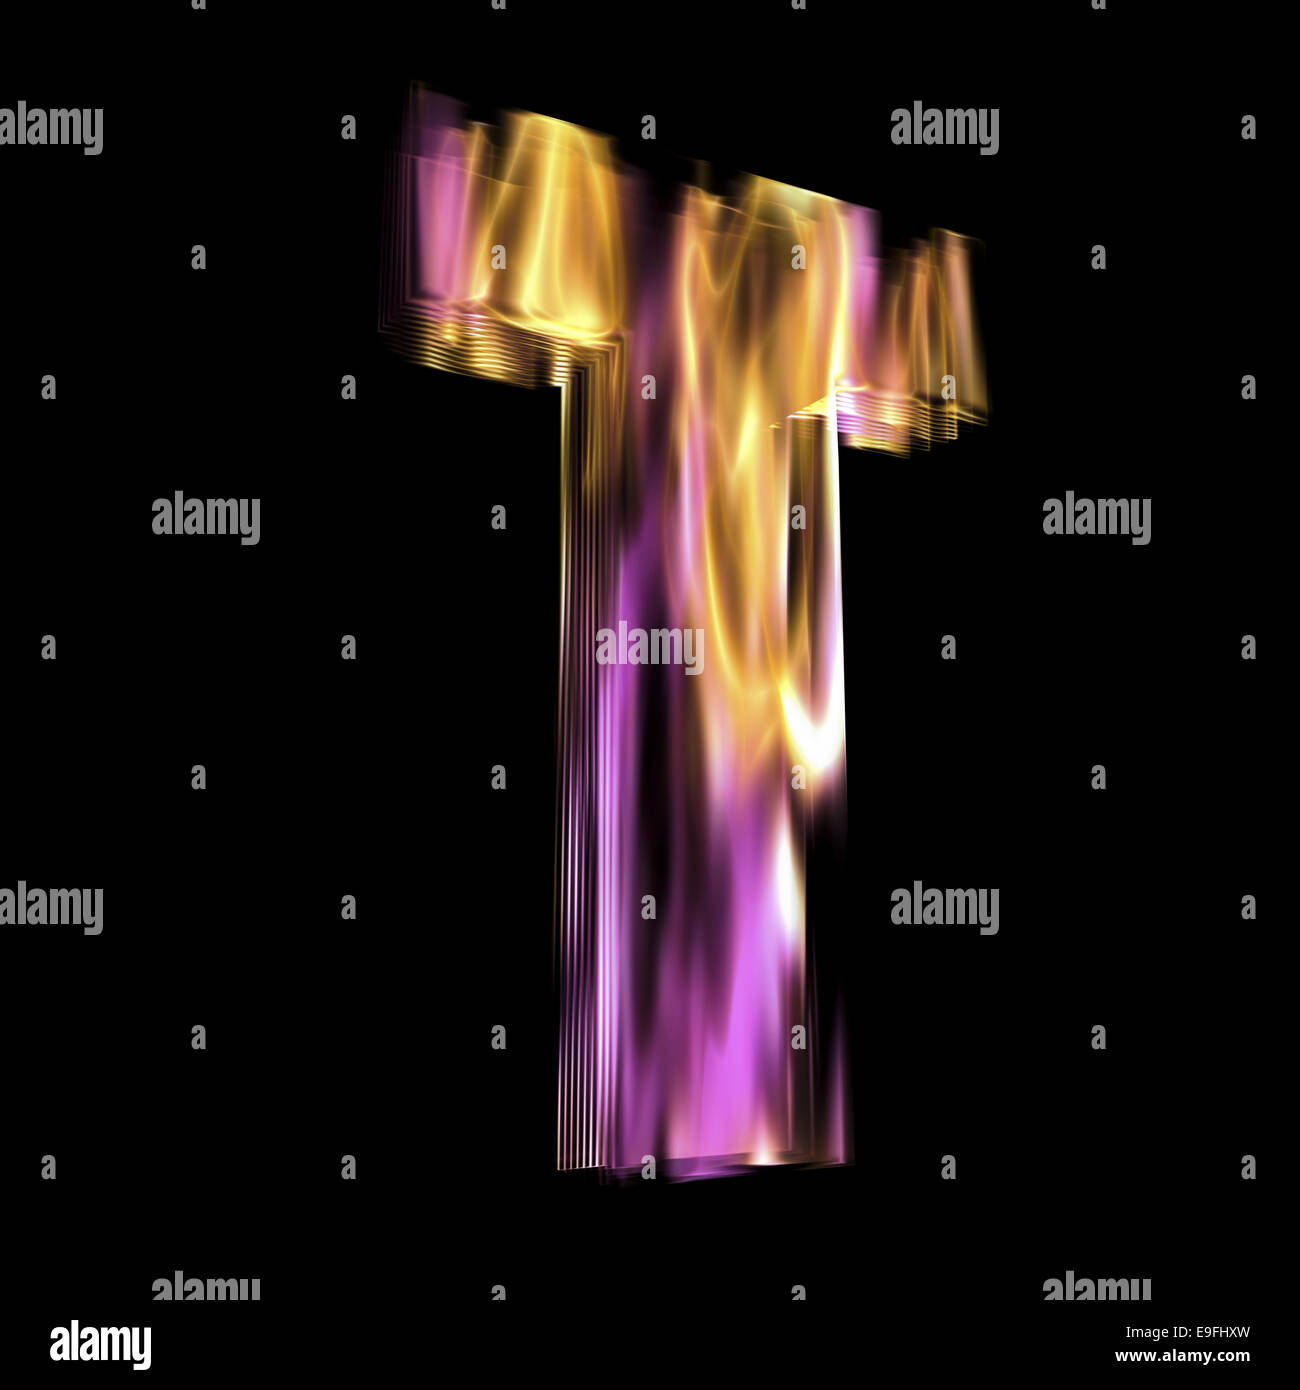 Flaming 3D Letter Stock Photo